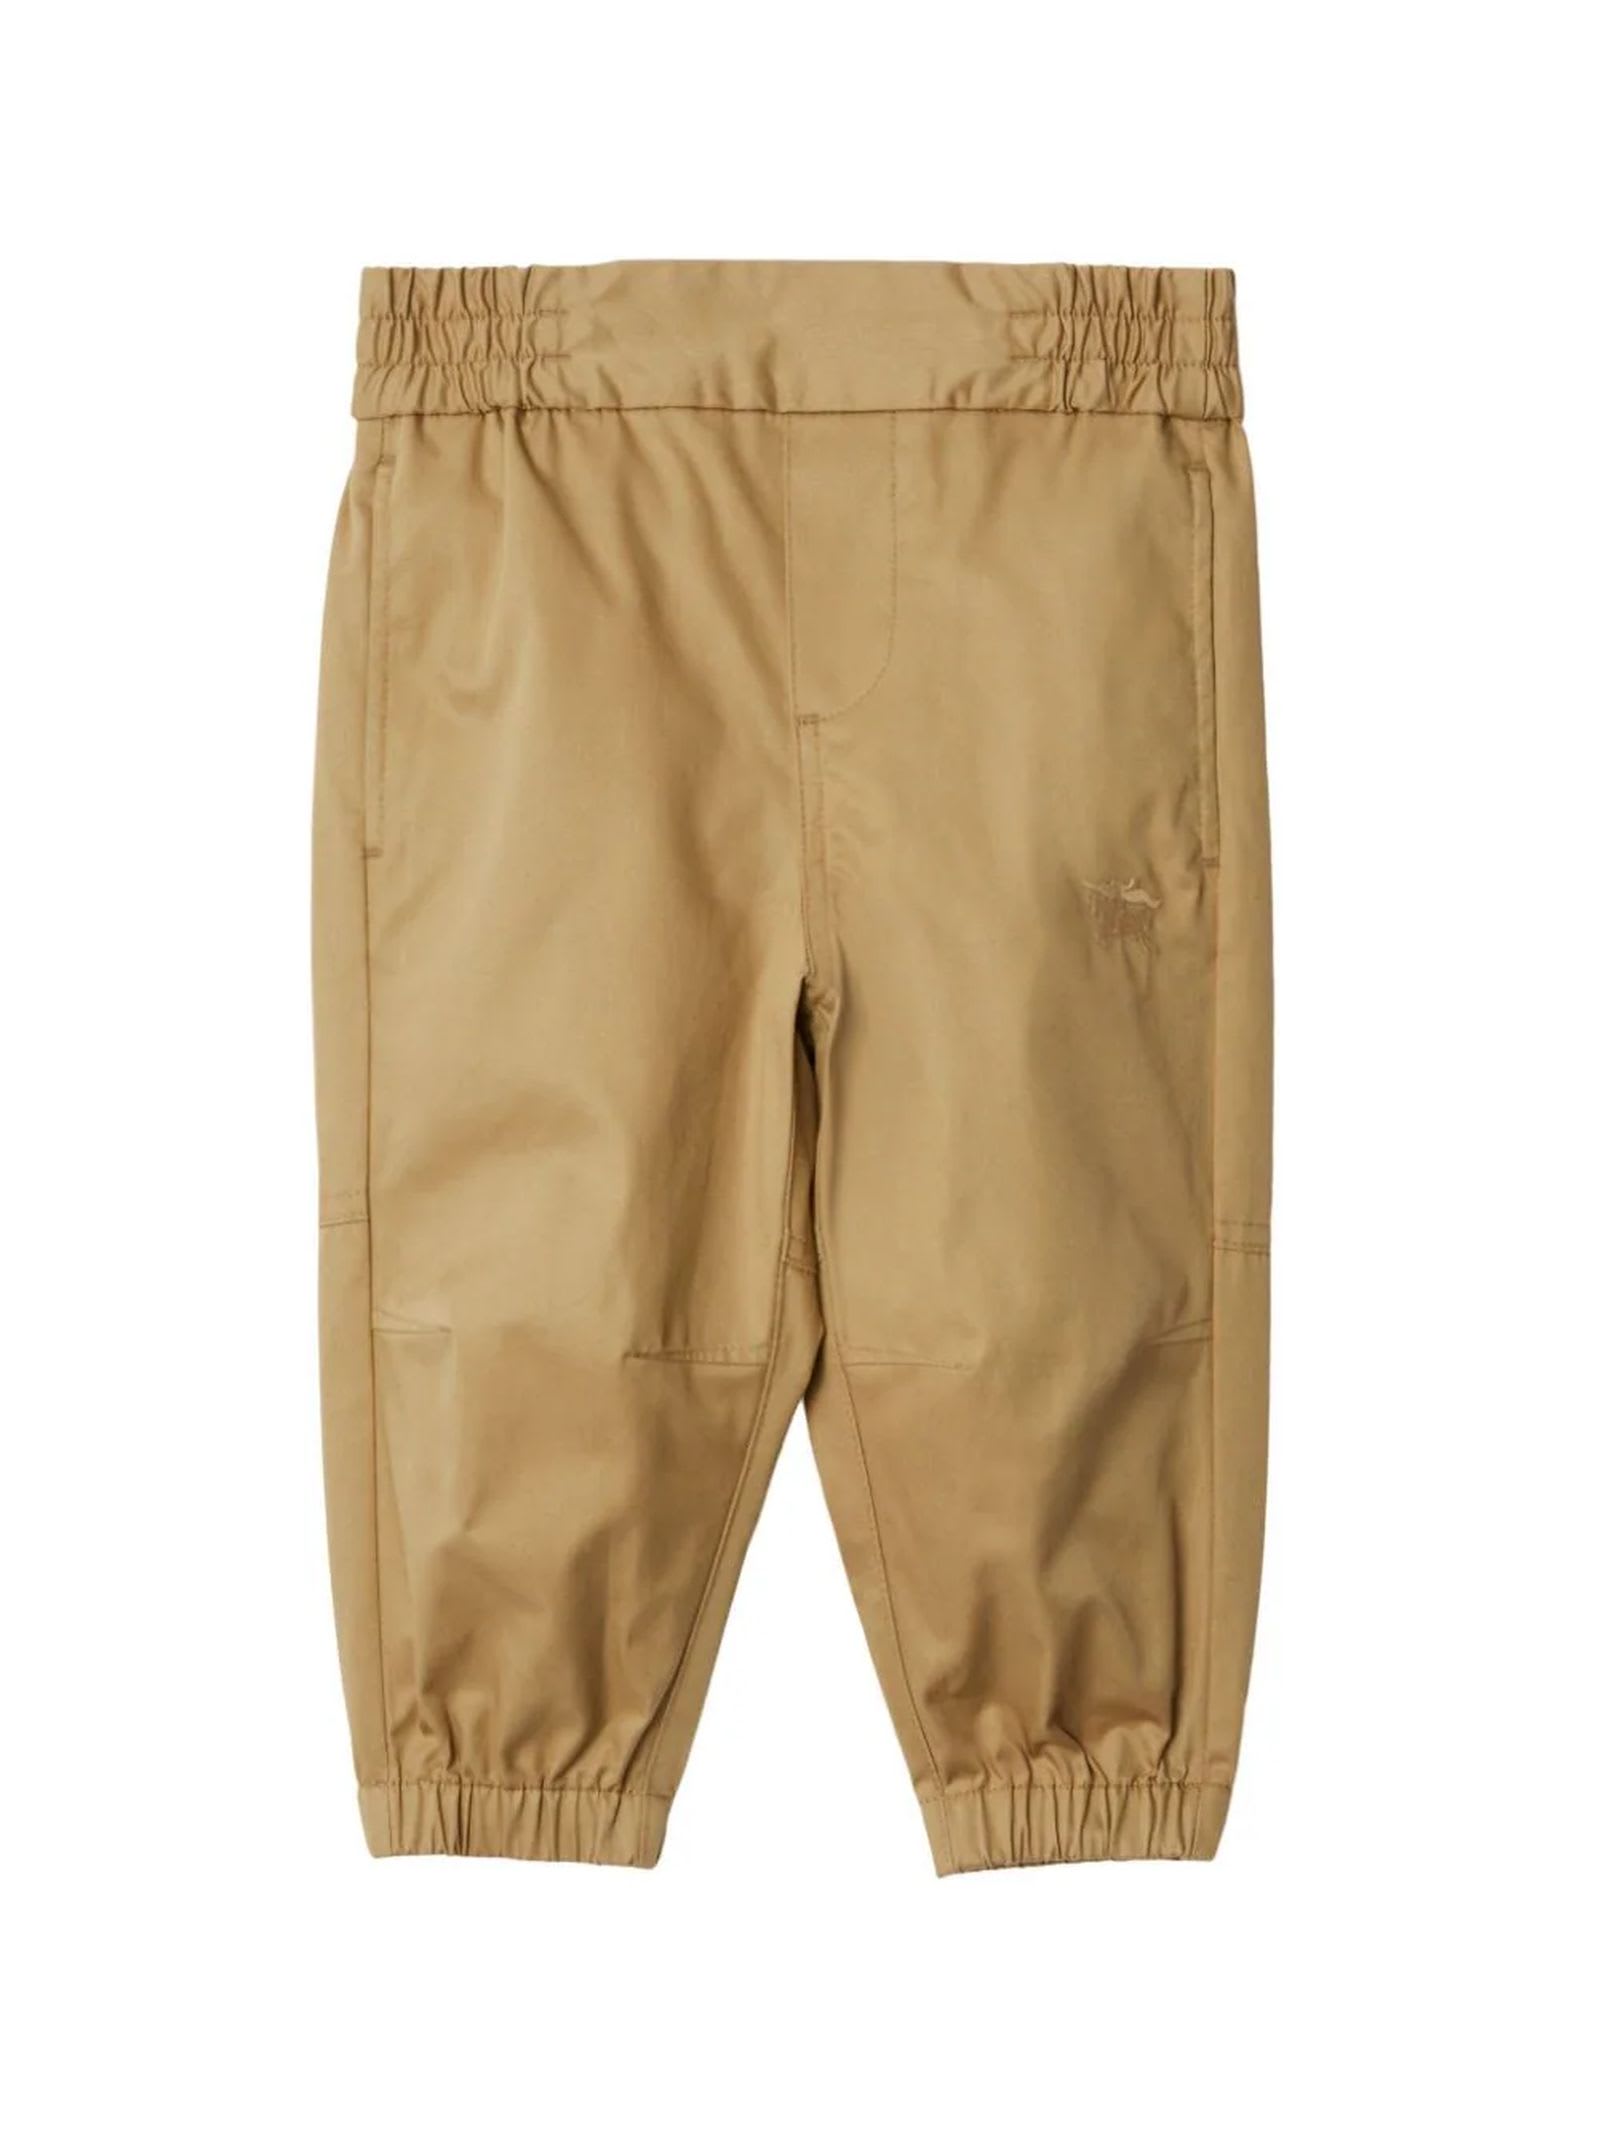 BURBERRY BEIGE COTTON TROUSERS